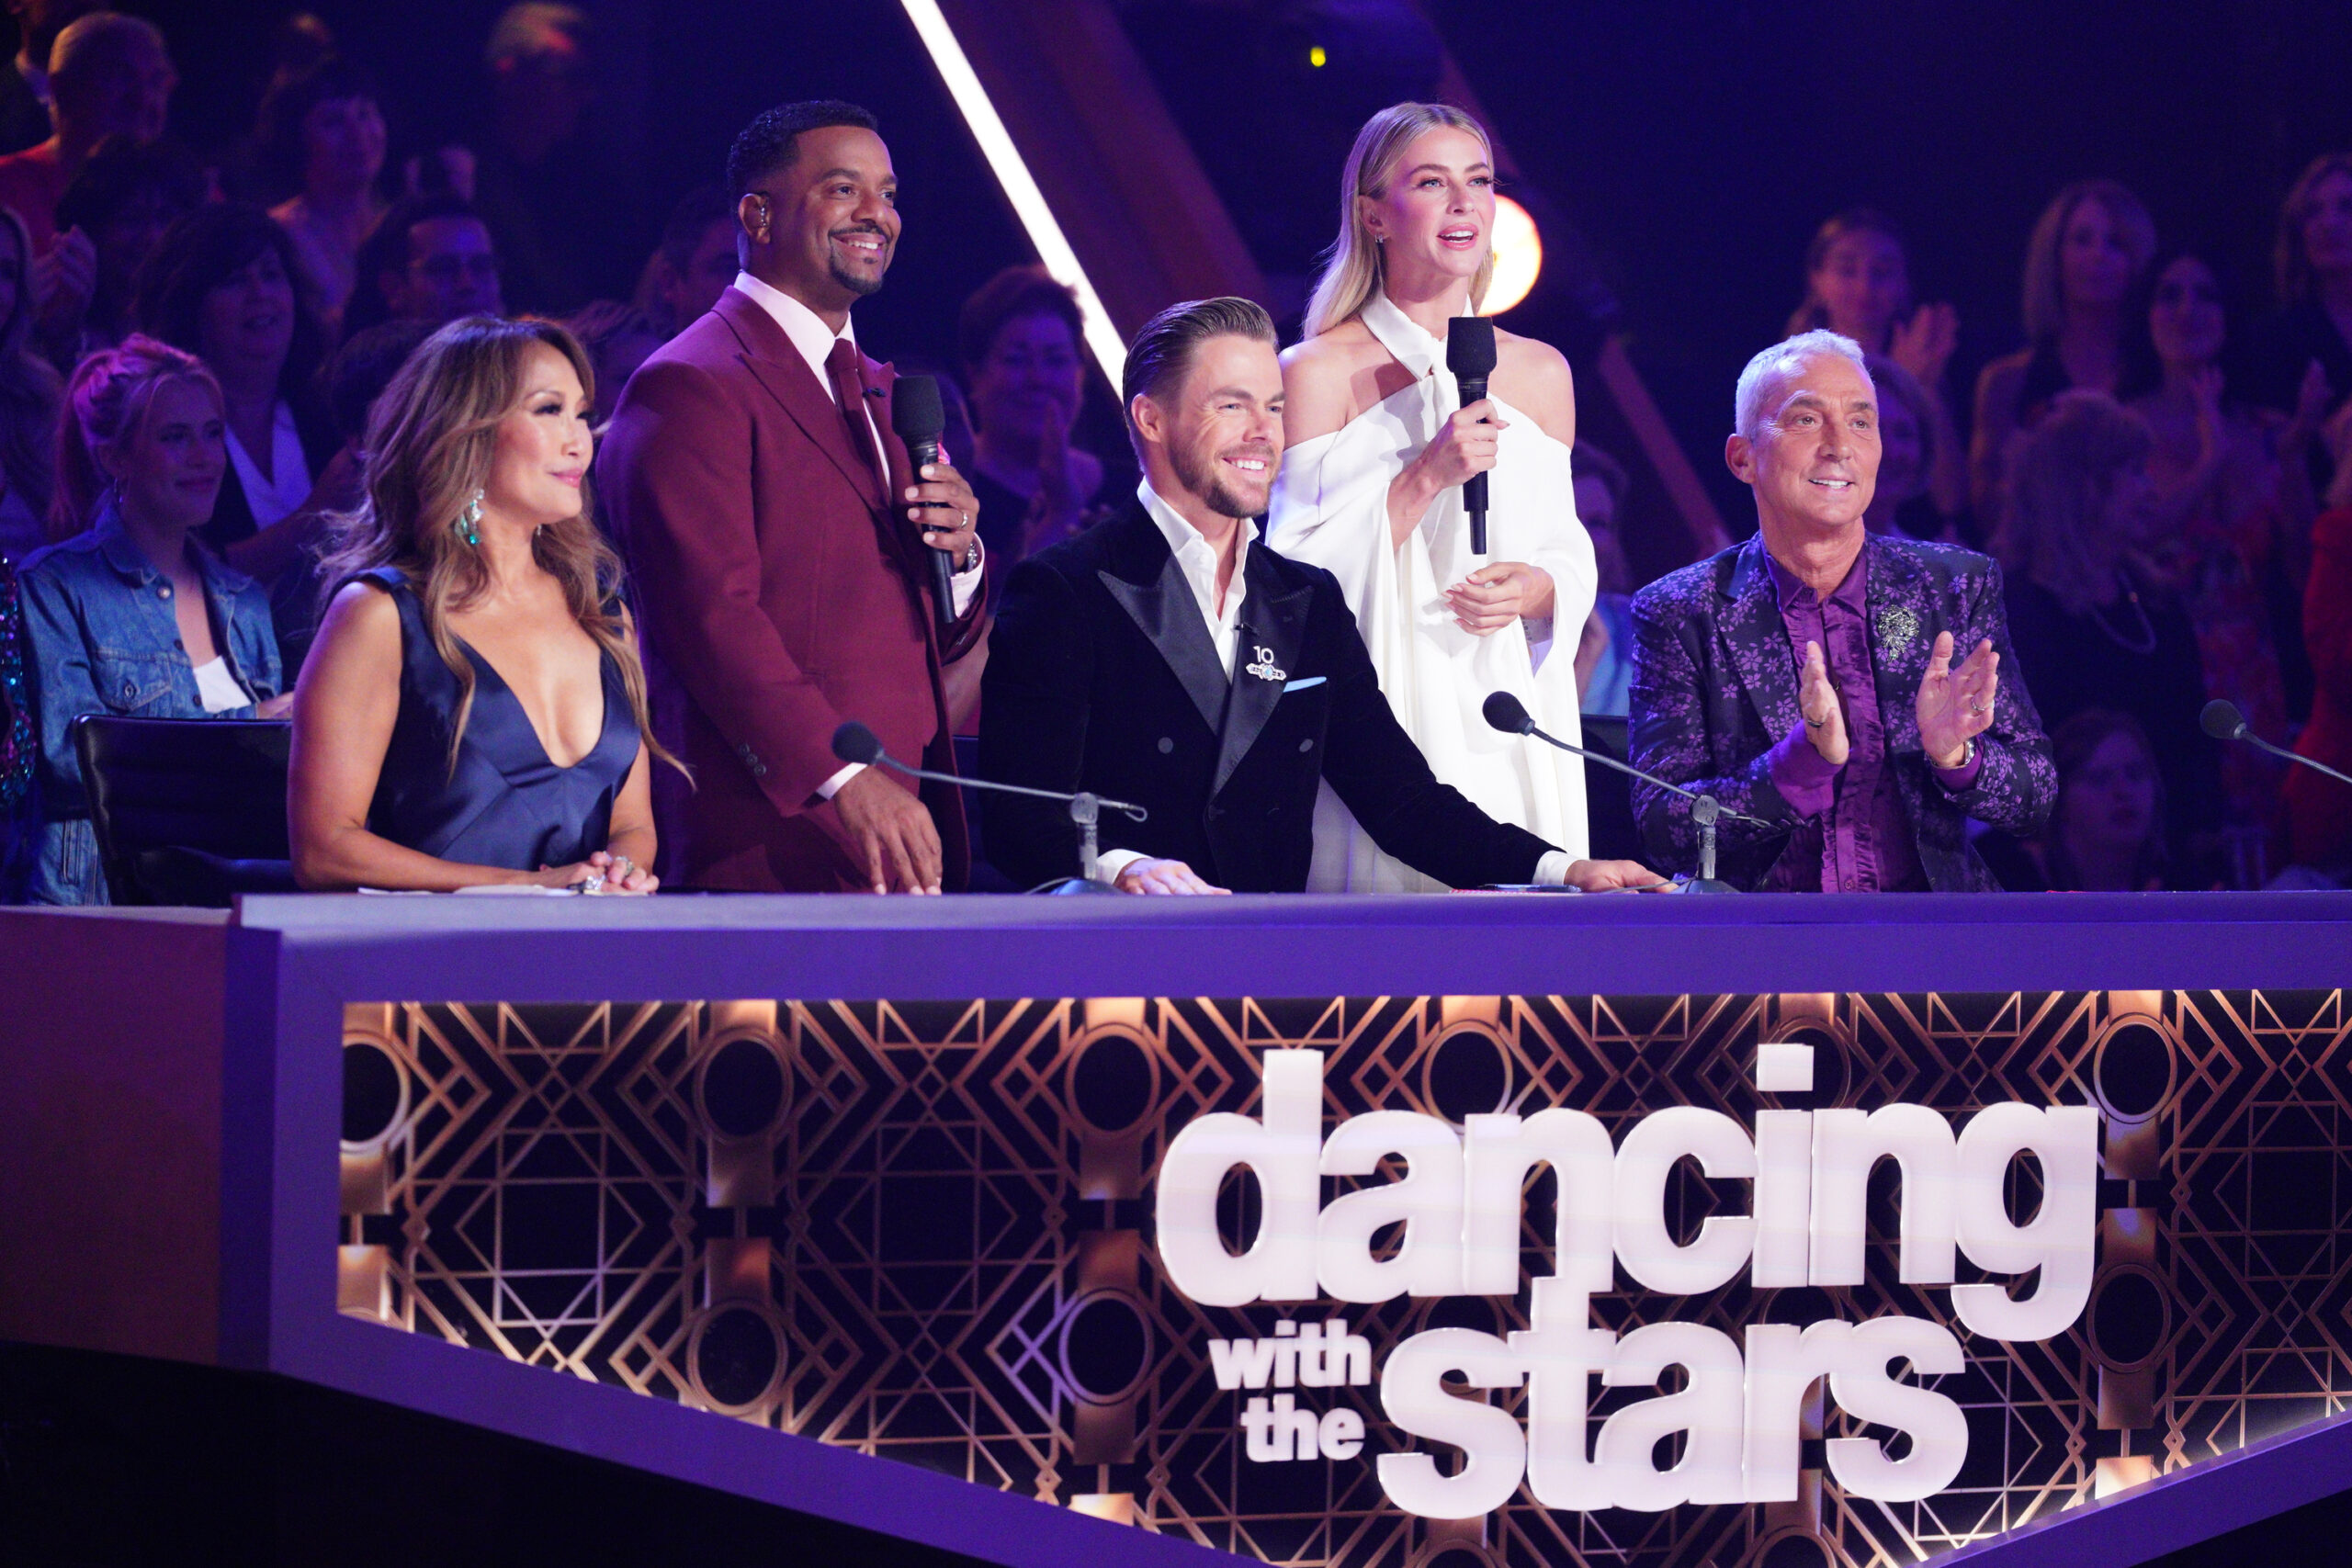 From left to right: Carrie Ann Inaba, Alfonso Ribeiro, Derek Hough, Julianne Hough, and Bruno Tonioli in DWTS. Photo by Disney/Christopher Willard.